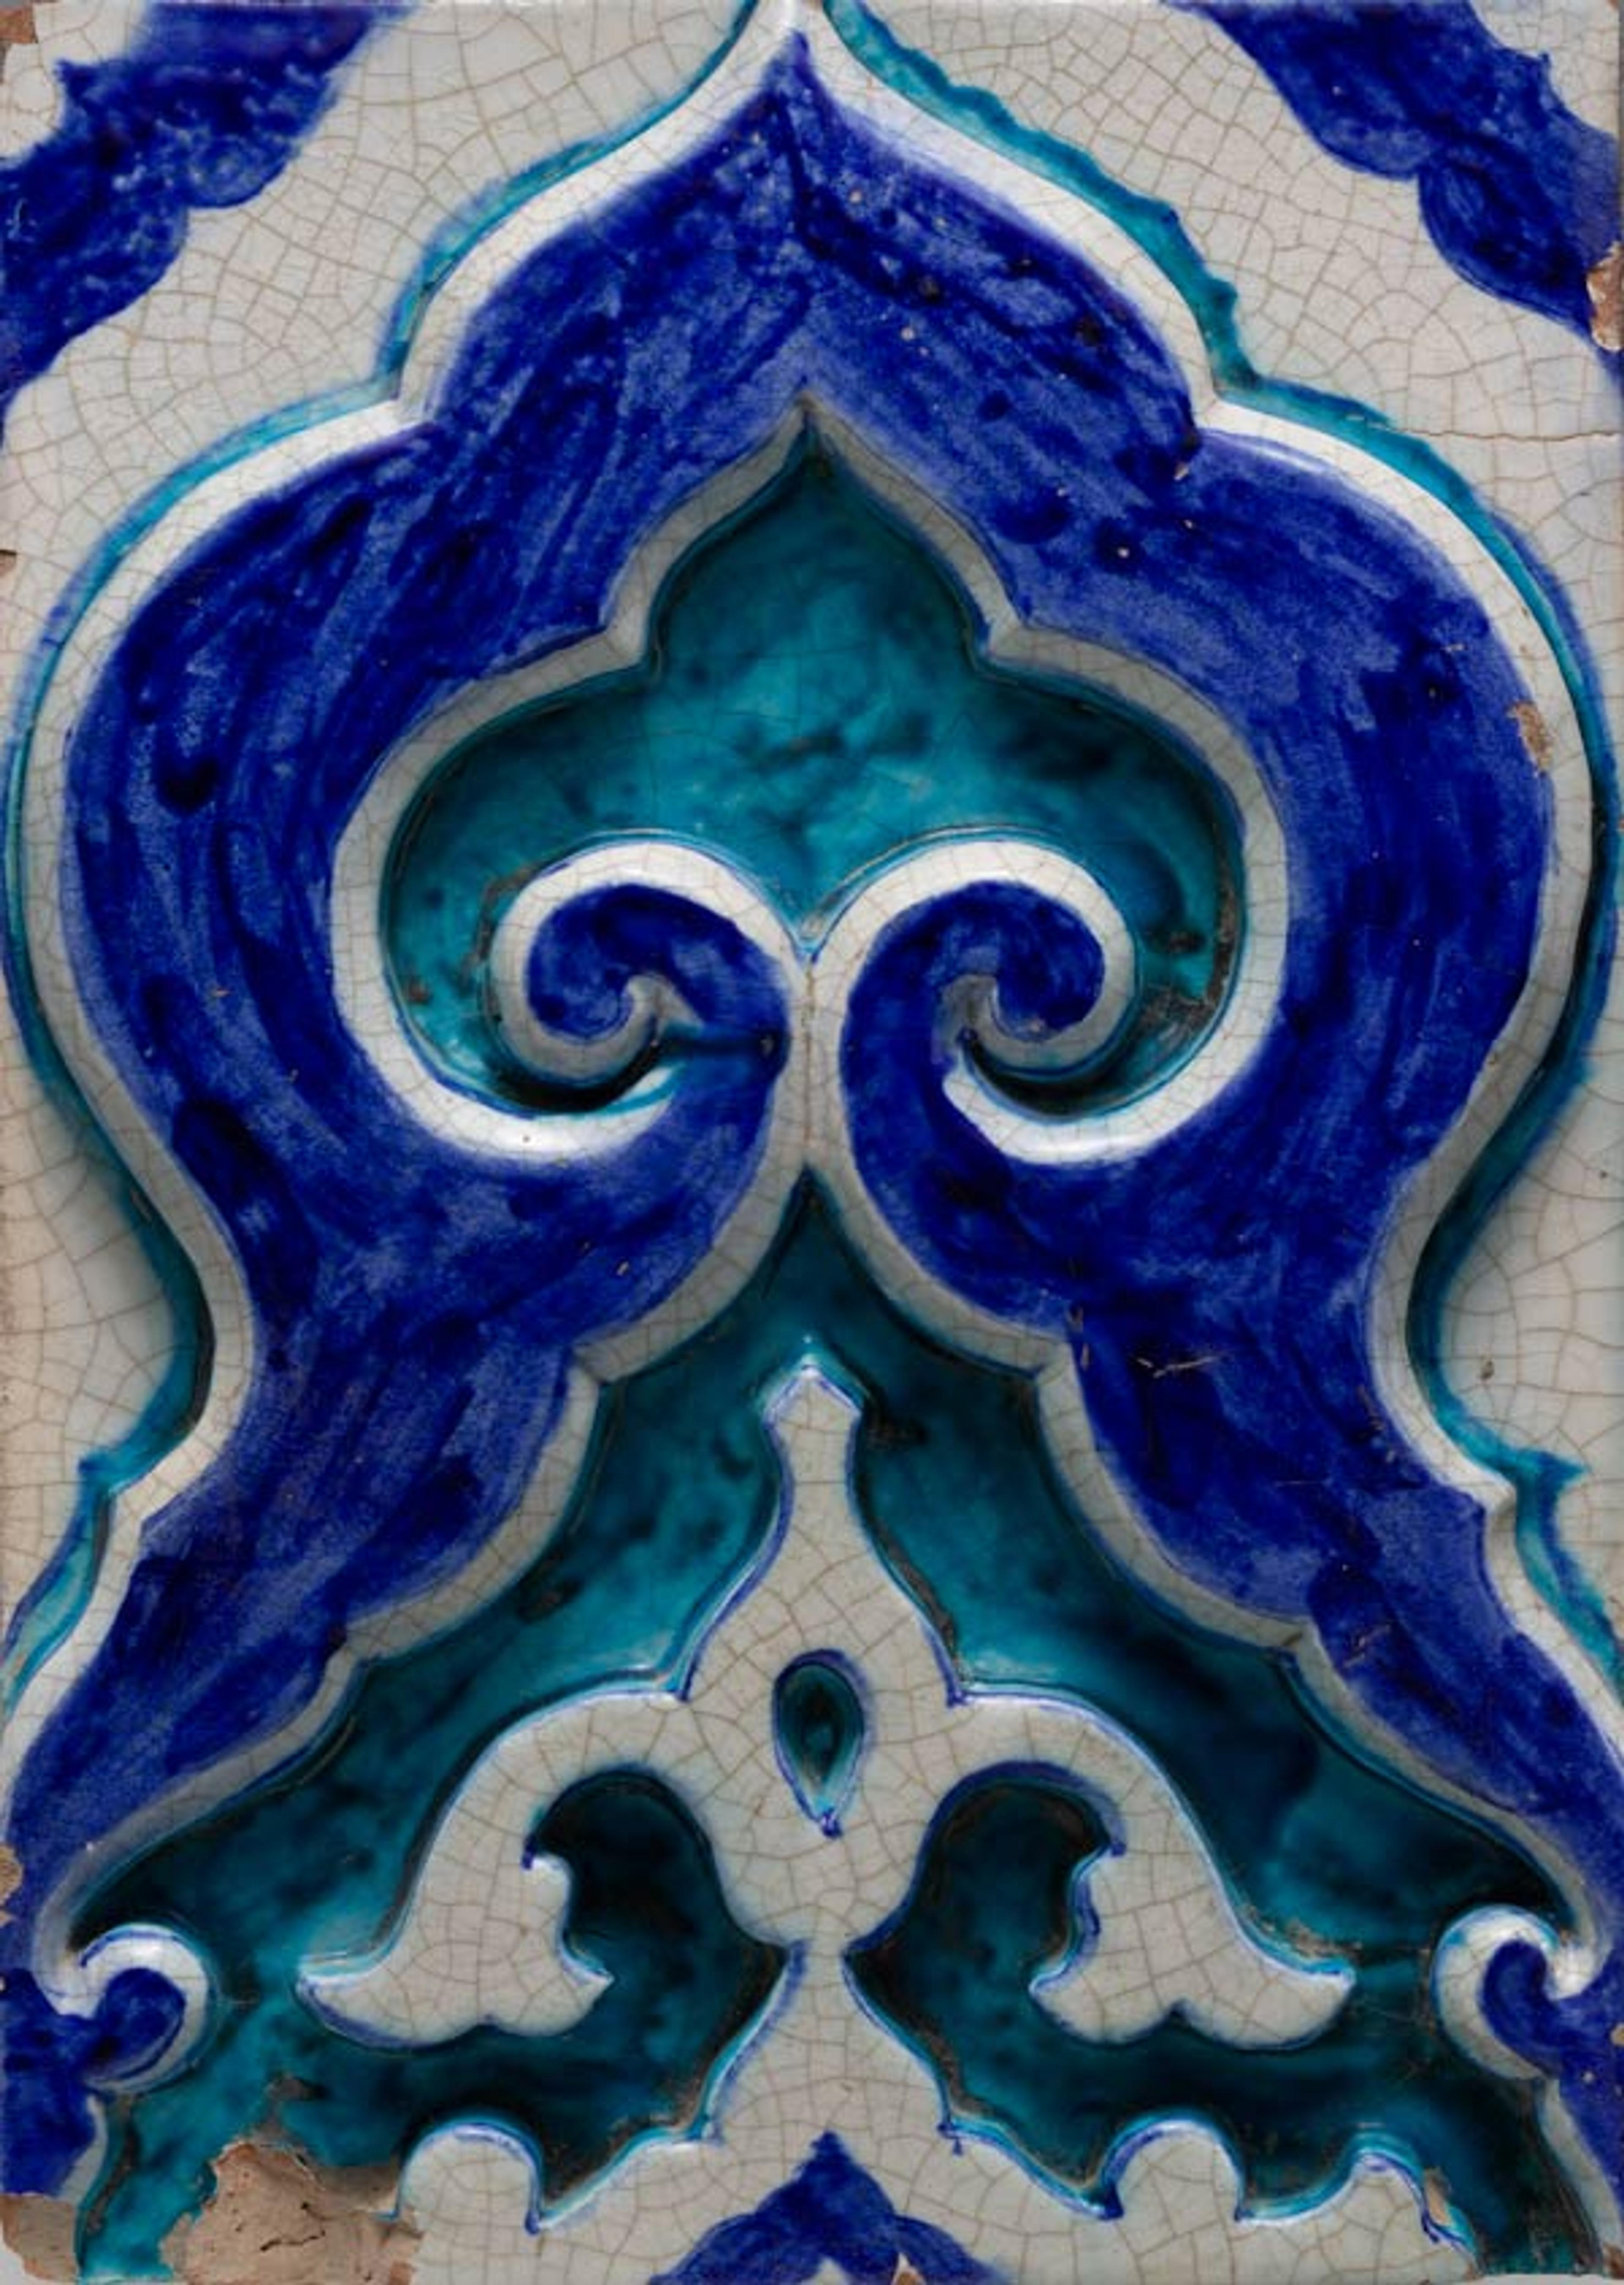 Tile, 18th century. Present-day Pakistan, Multan. Earthenware; molded decoration and glazed; 14 1/2 x 10 1/4 x 2 in. (36.8 x 26 x 5.1 cm). The Metropolitan Museum of Art, New York, Purchase, Friends of Islamic Art Gifts, 2007